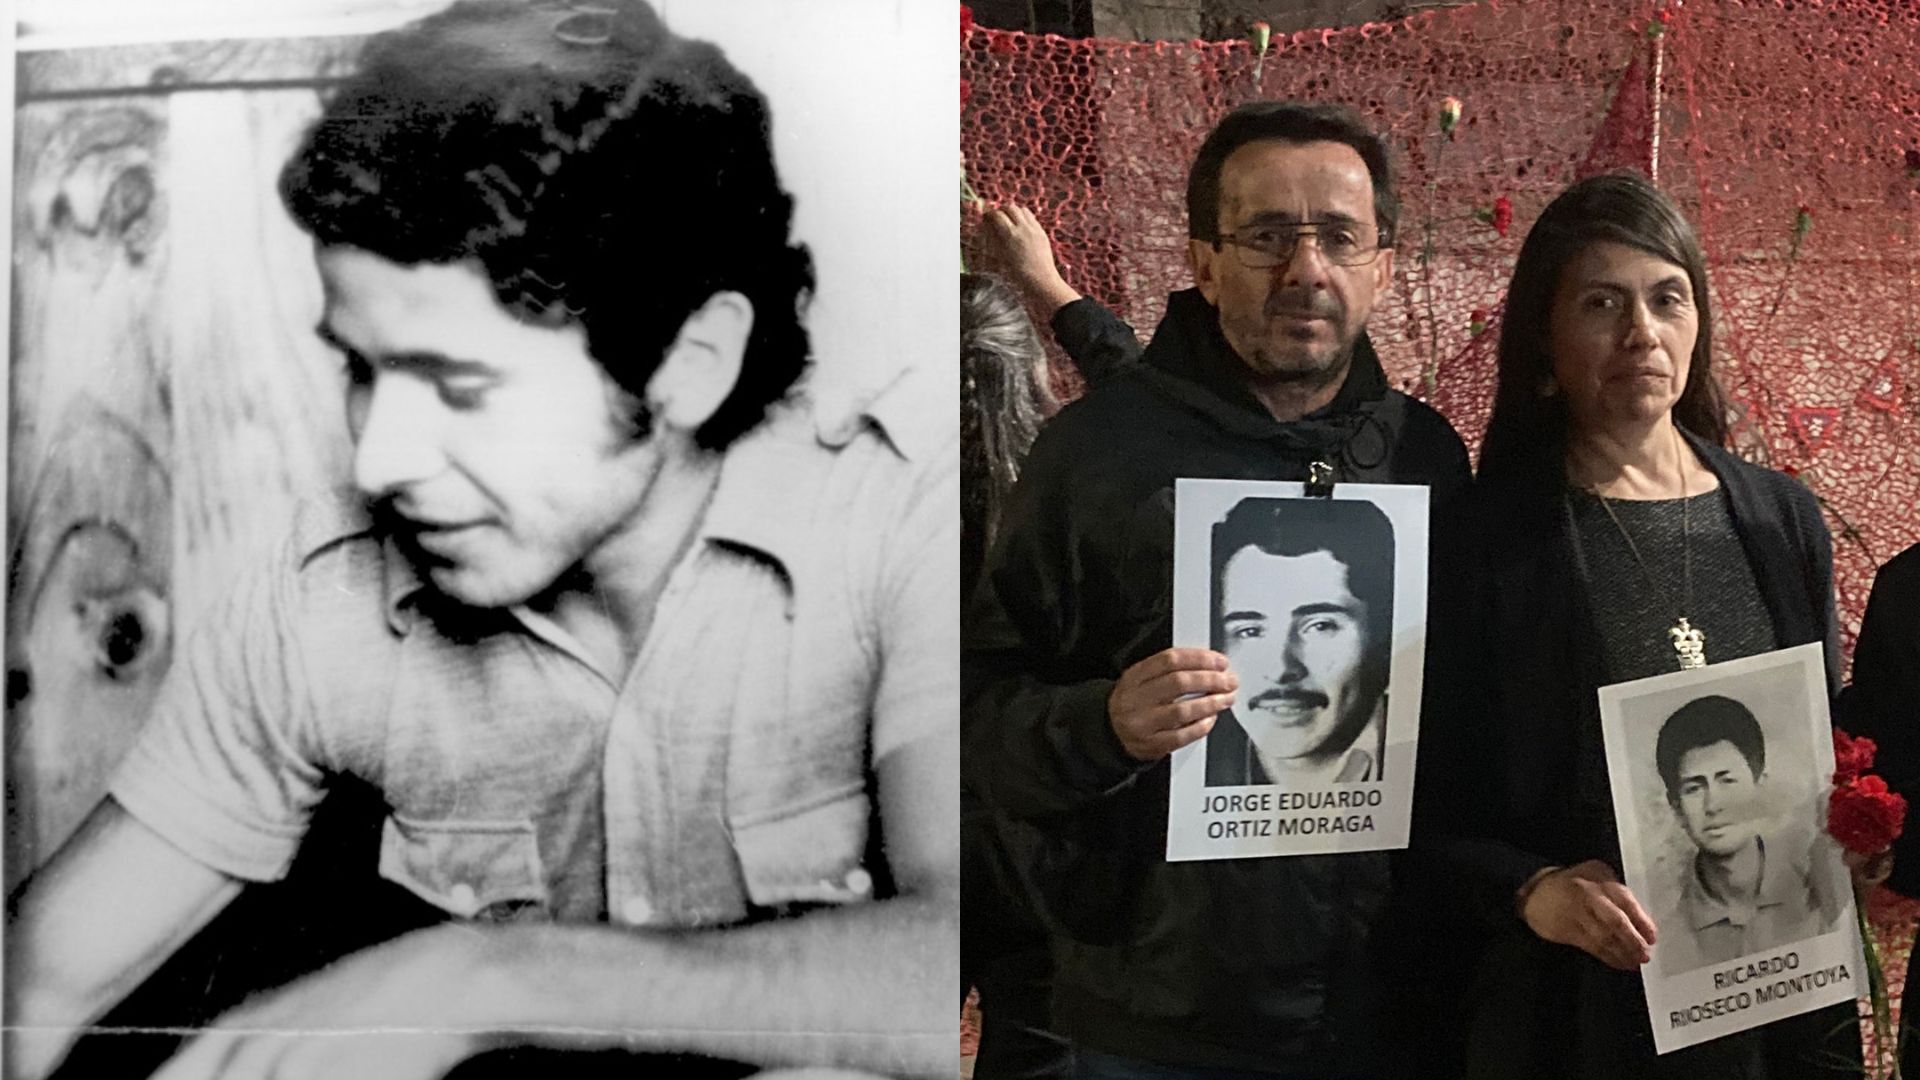 Chile’s coup 50 years on: cries for justice are waiting for answers